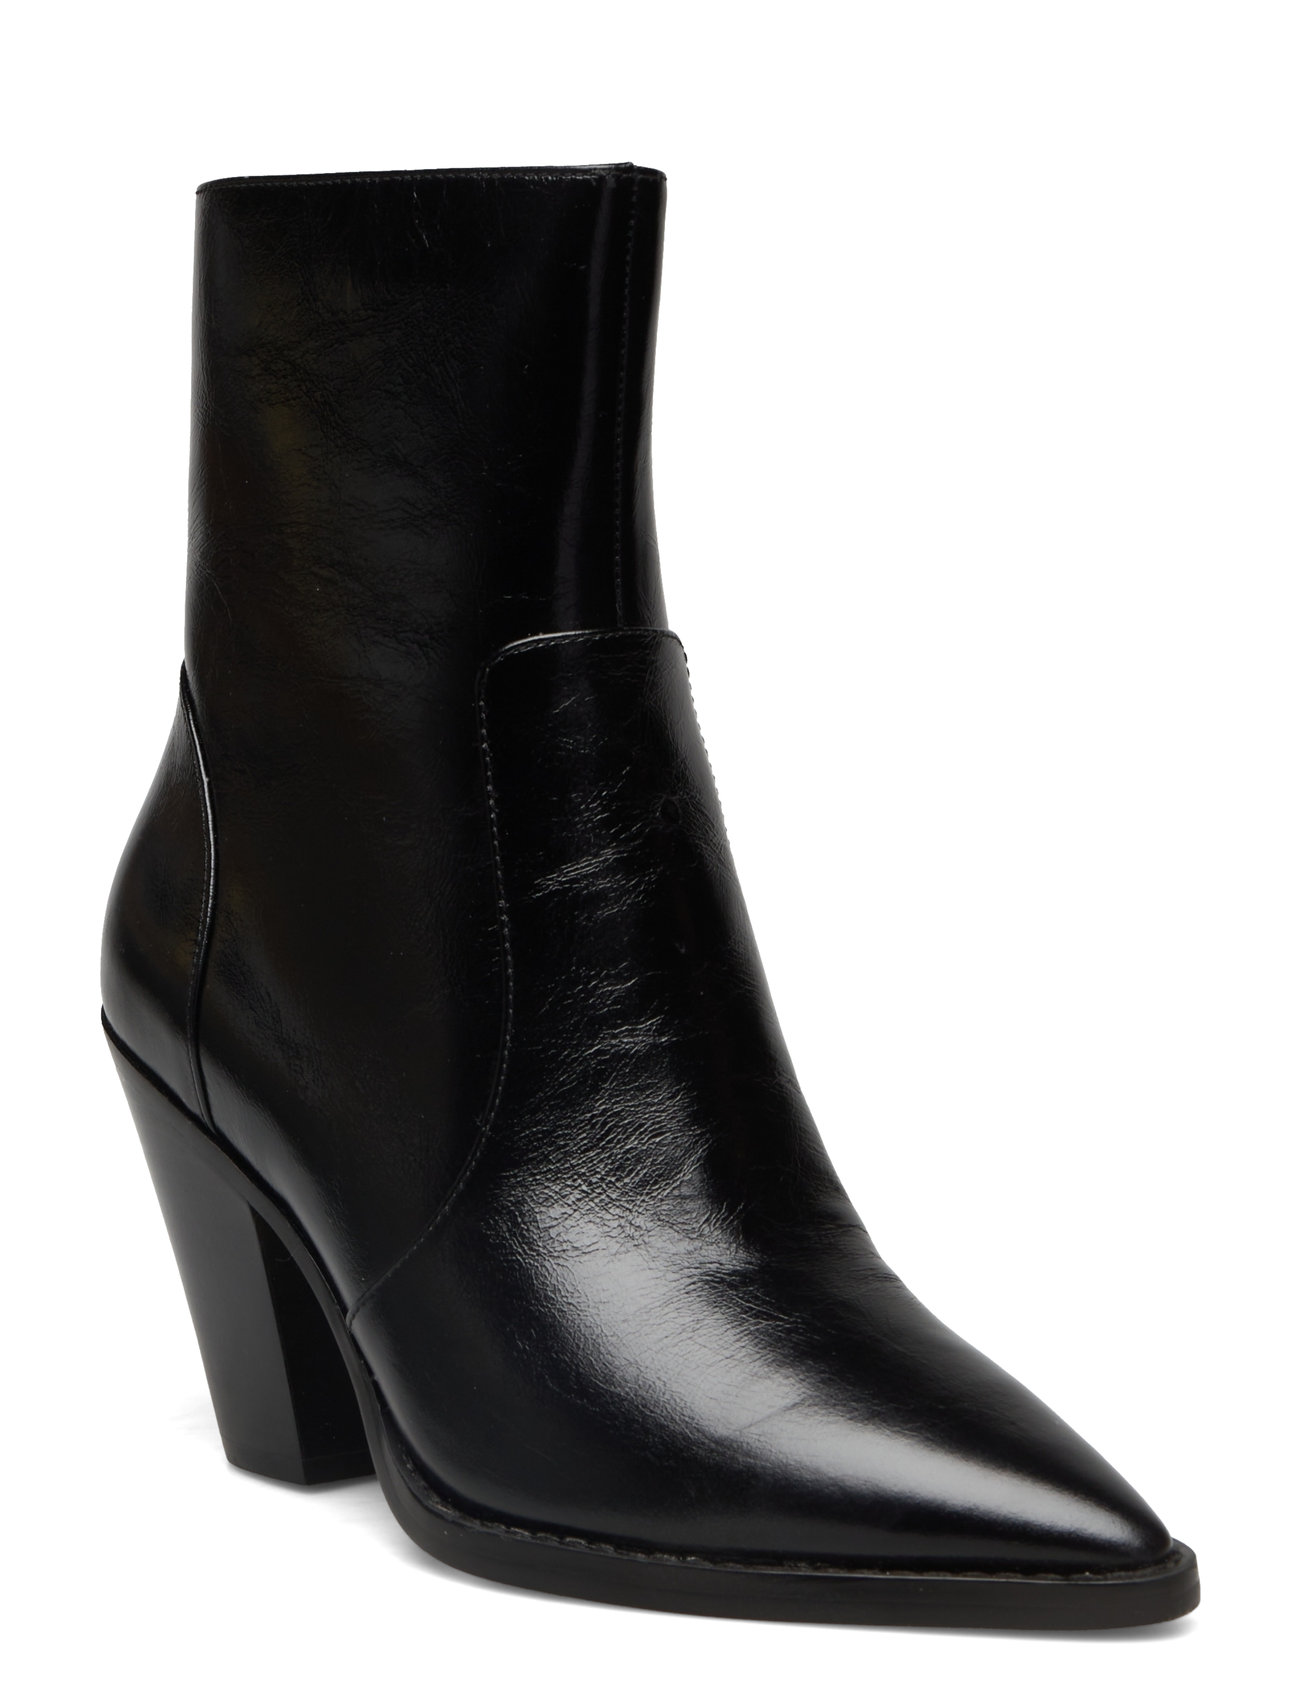 Dover Heeled Bootie Shoes Boots Ankle Boots Ankle Boots With Heel Black Michael Kors